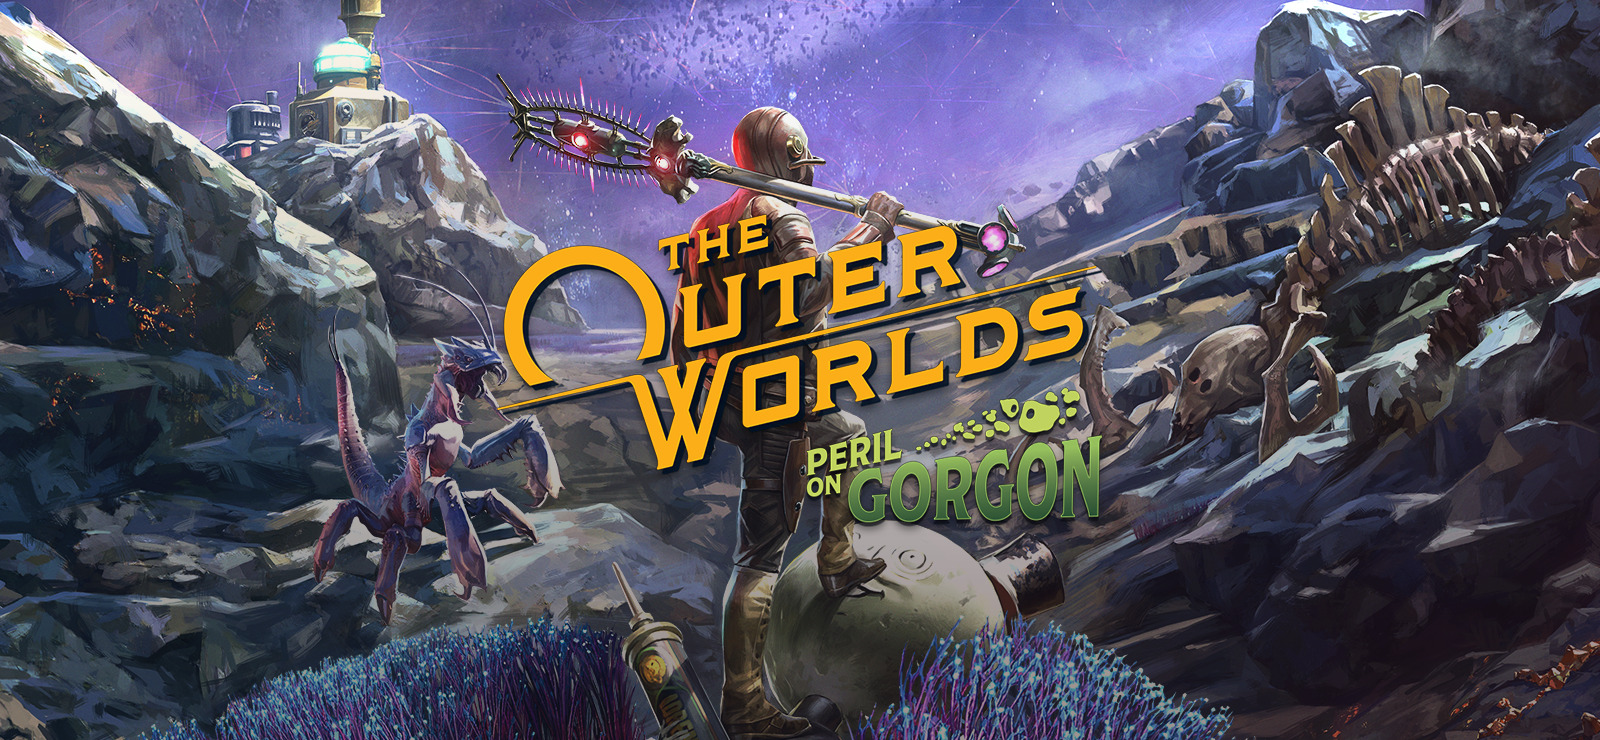 The Outer Worlds: Peril on Gorgon review